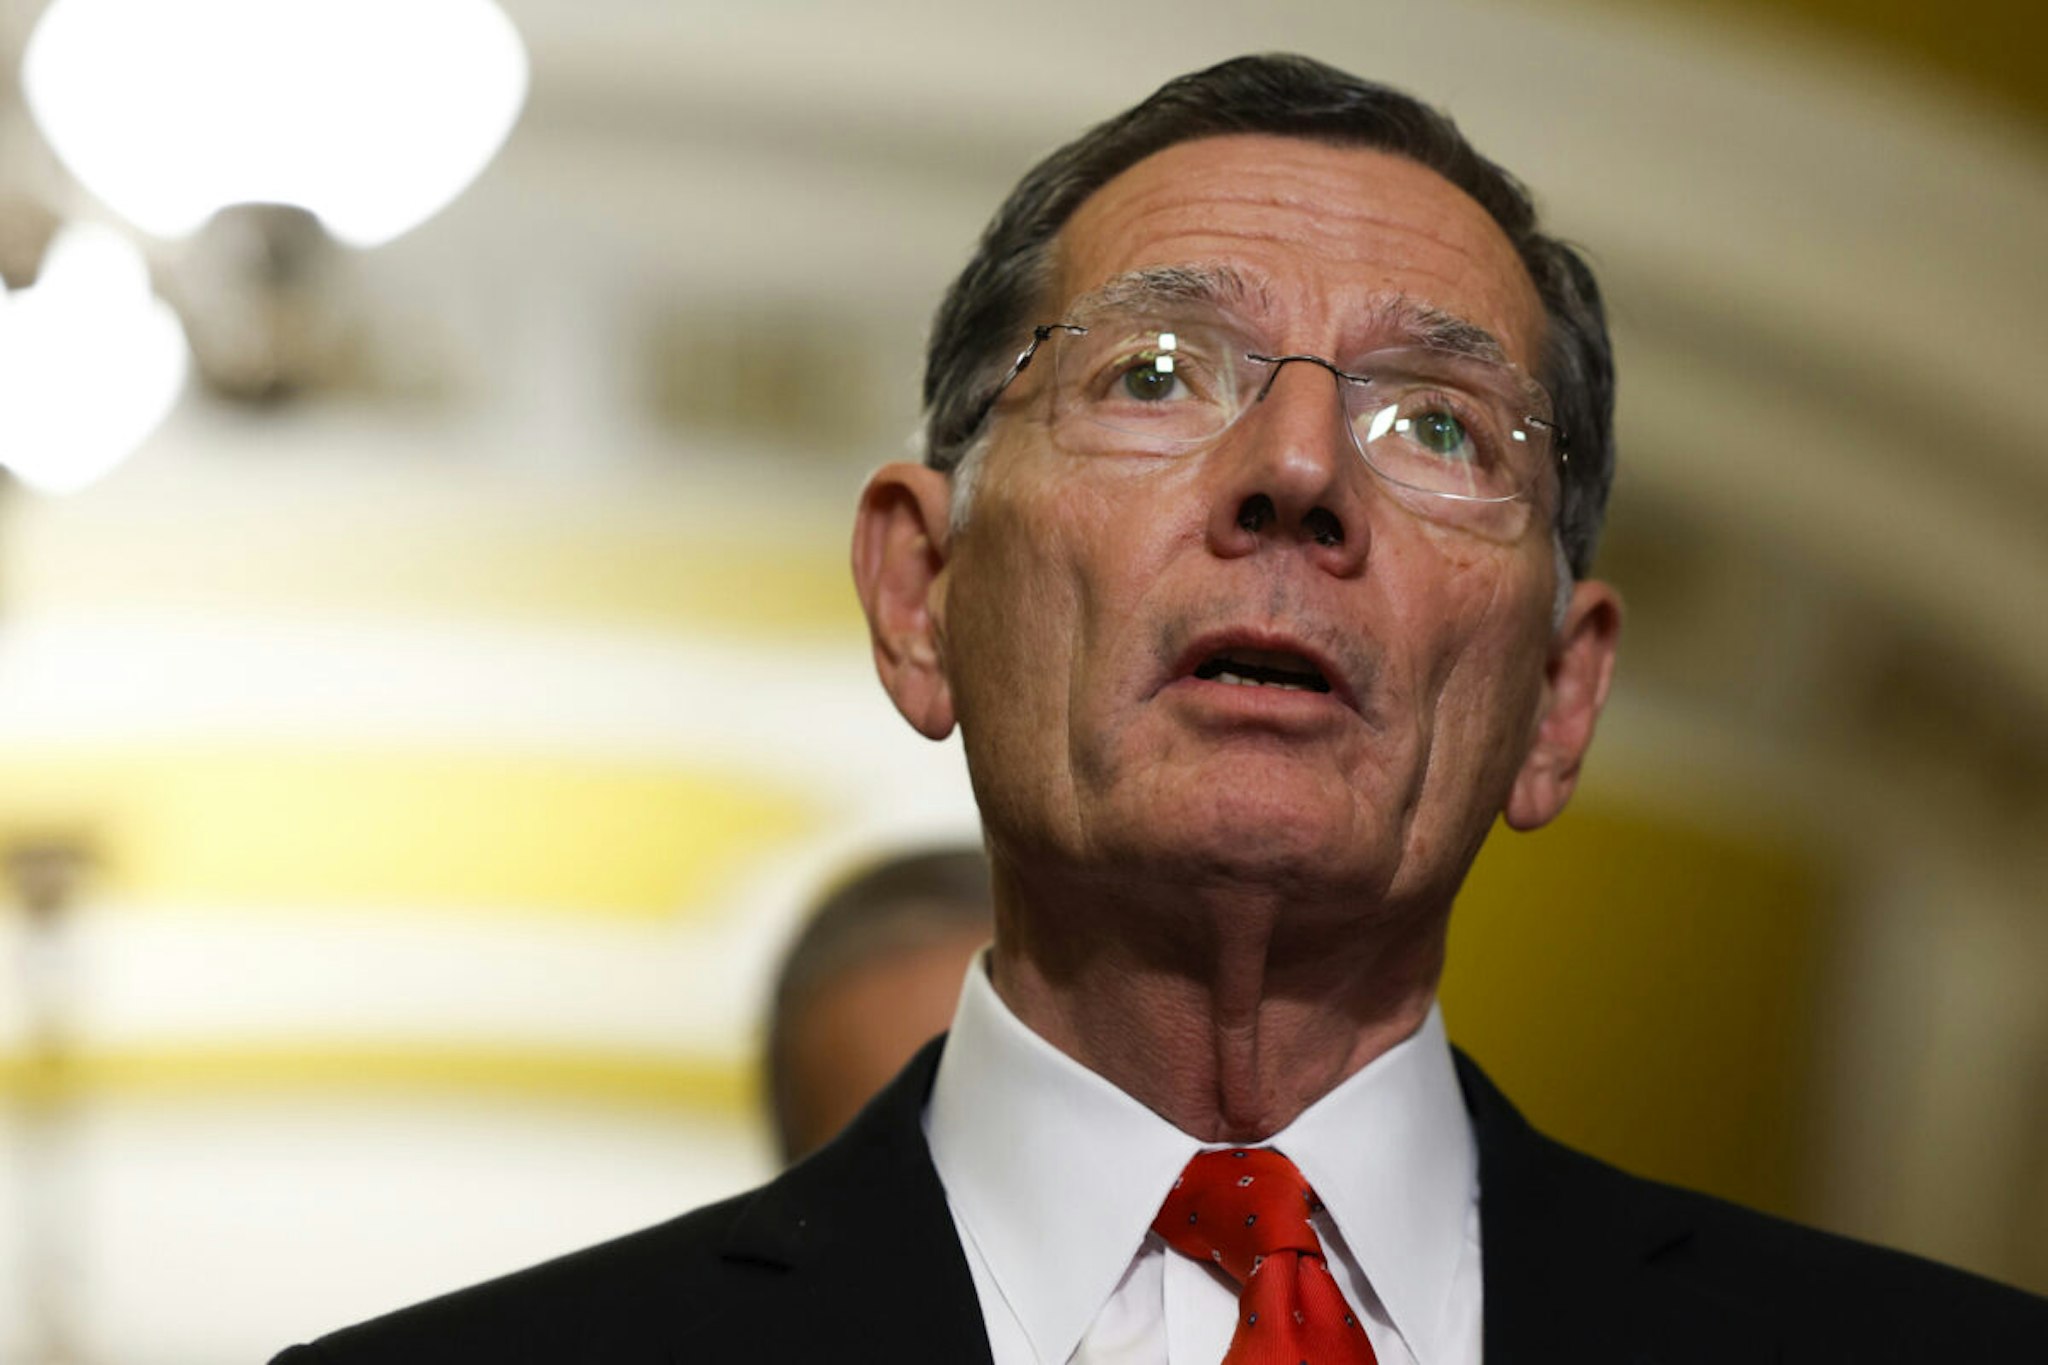 Sen. John Barrasso (R-WY) speaks during a news conference following the weekly Republican Senate policy luncheon meeting at the U.S. Capitol Building on September 19, 2023 in Washington, DC.